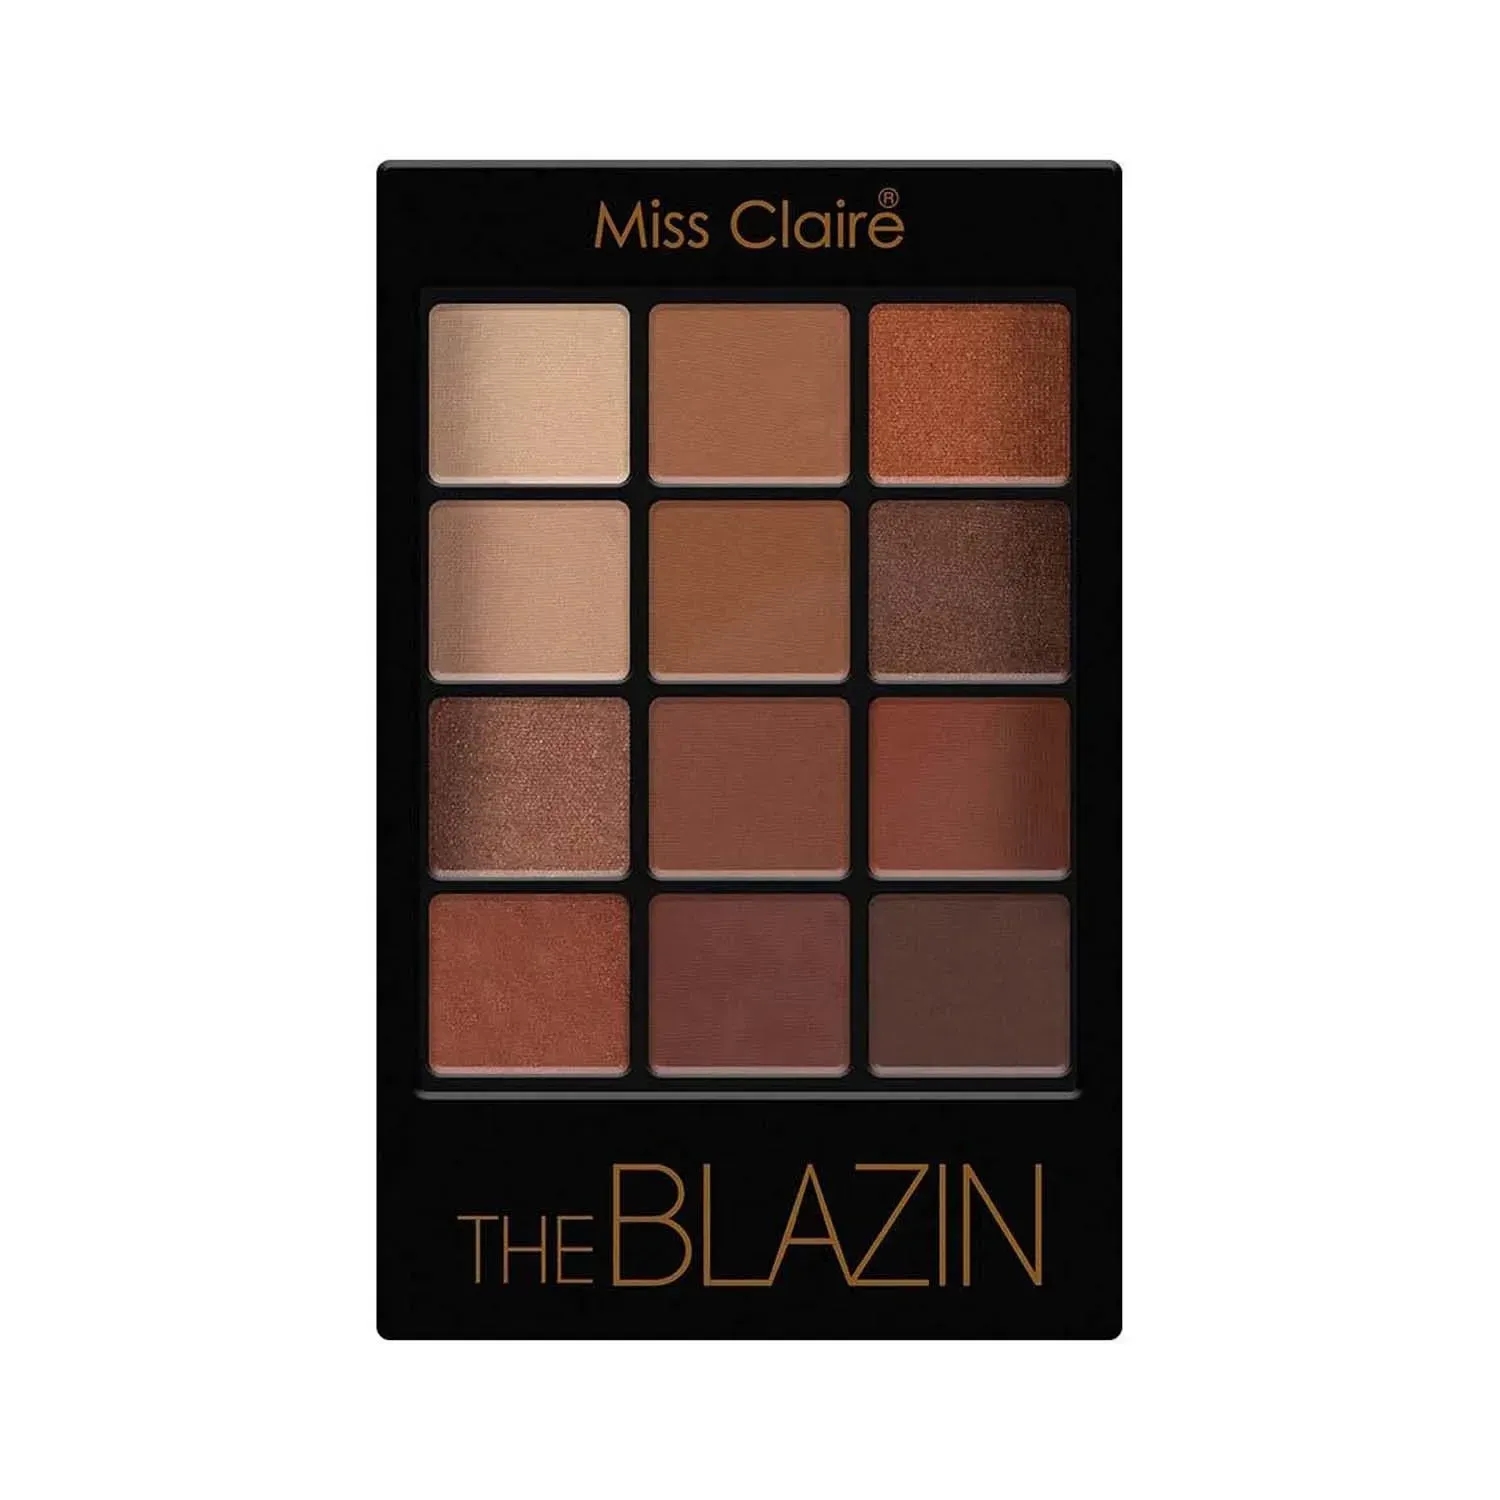 Miss Claire | Miss Claire 12 Eyeshadow Kit - The Blazin (6g)